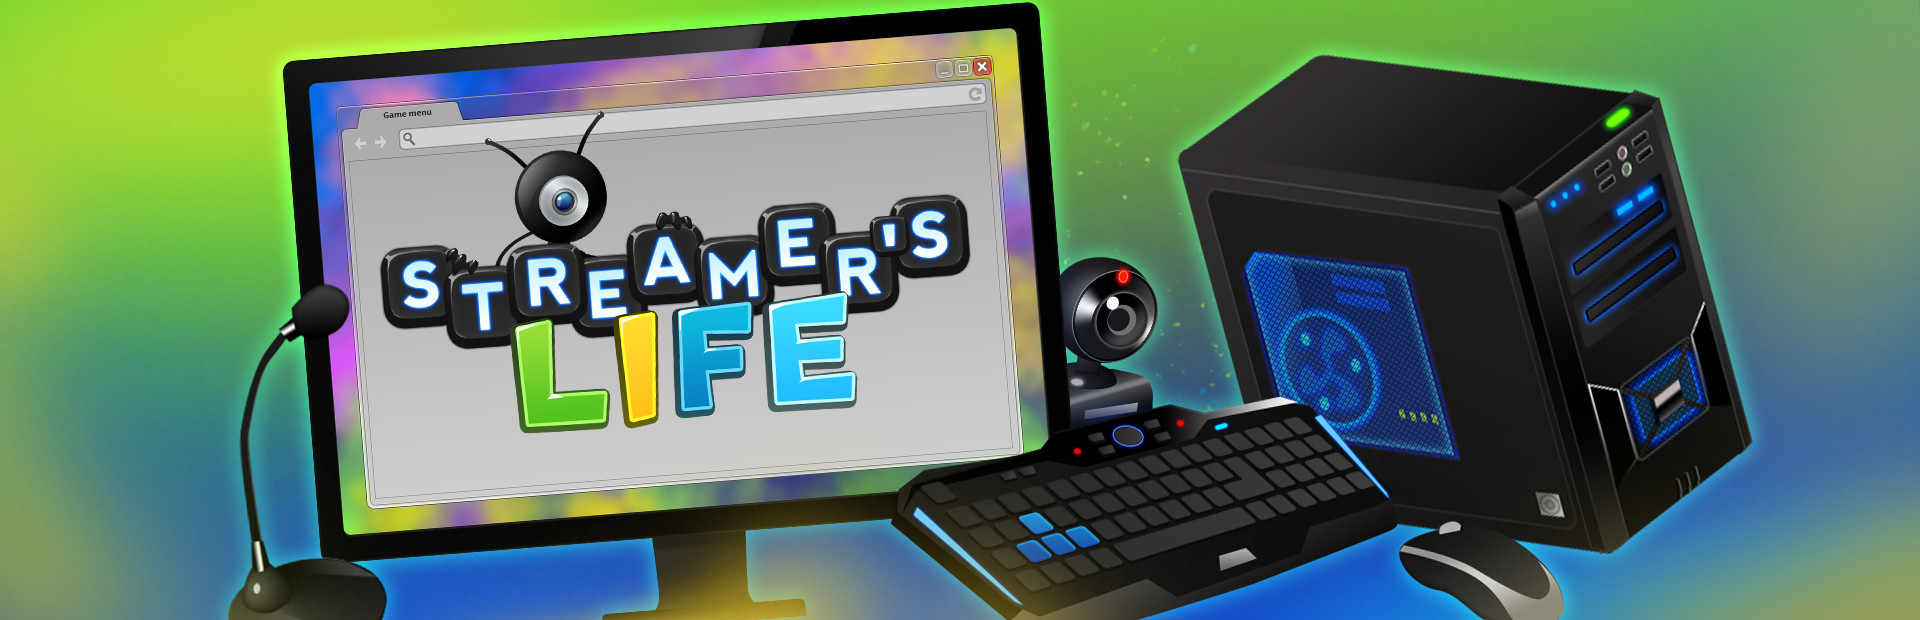 Streamer's Life cover image